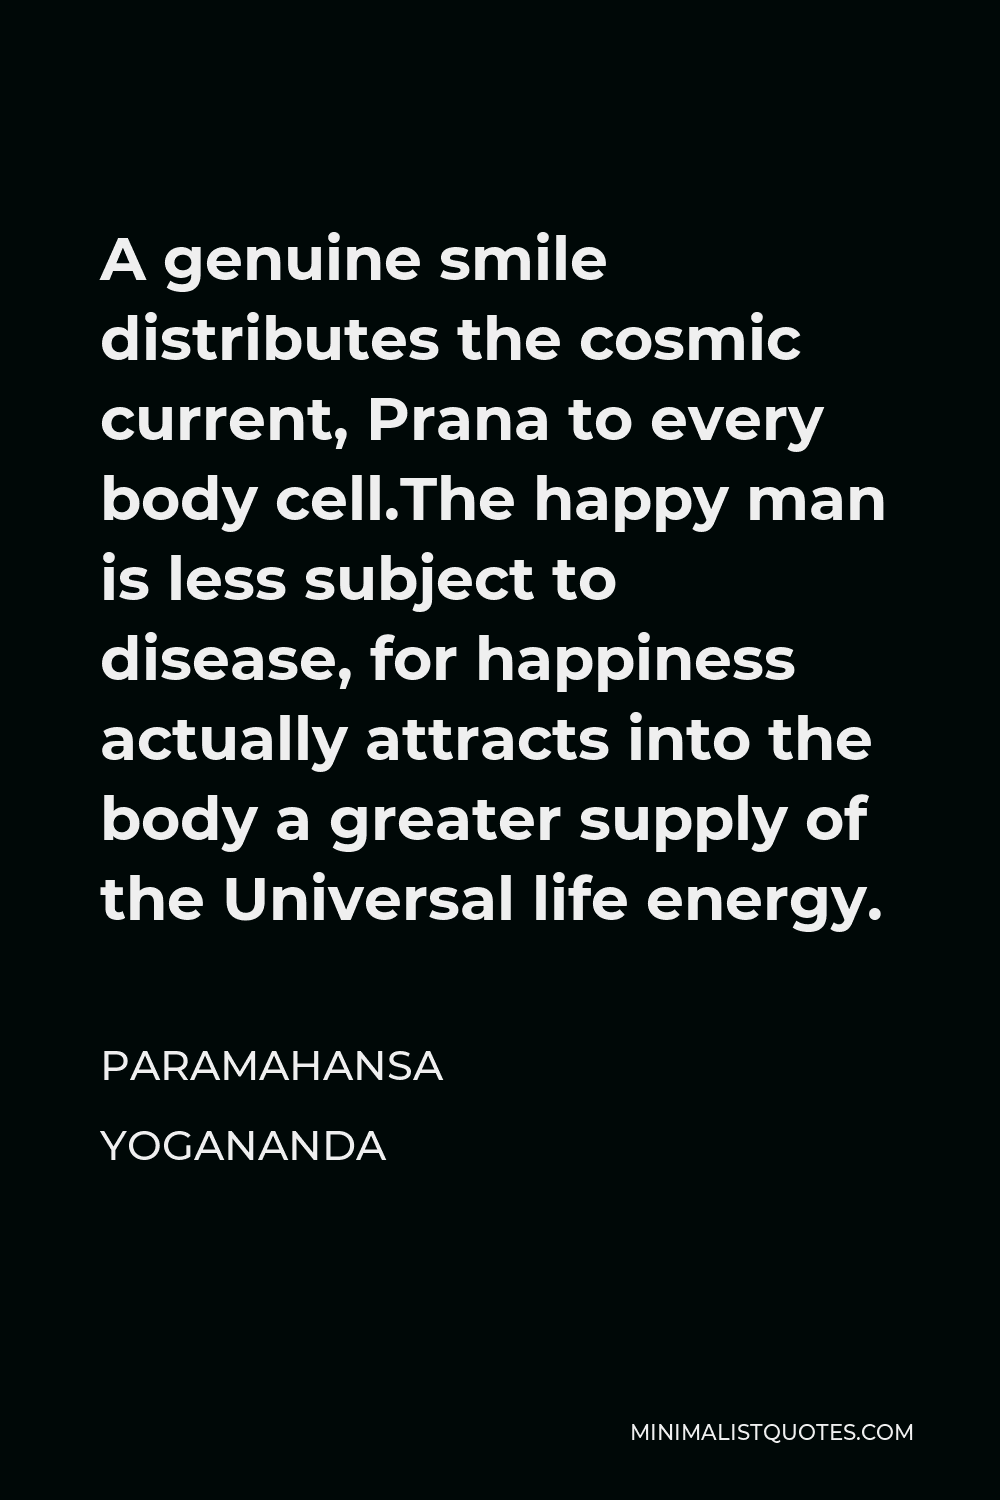 Paramahansa Yogananda Quote - A genuine smile distributes the cosmic current, Prana to every body cell.The happy man is less subject to disease, for happiness actually attracts into the body a greater supply of the Universal life energy.